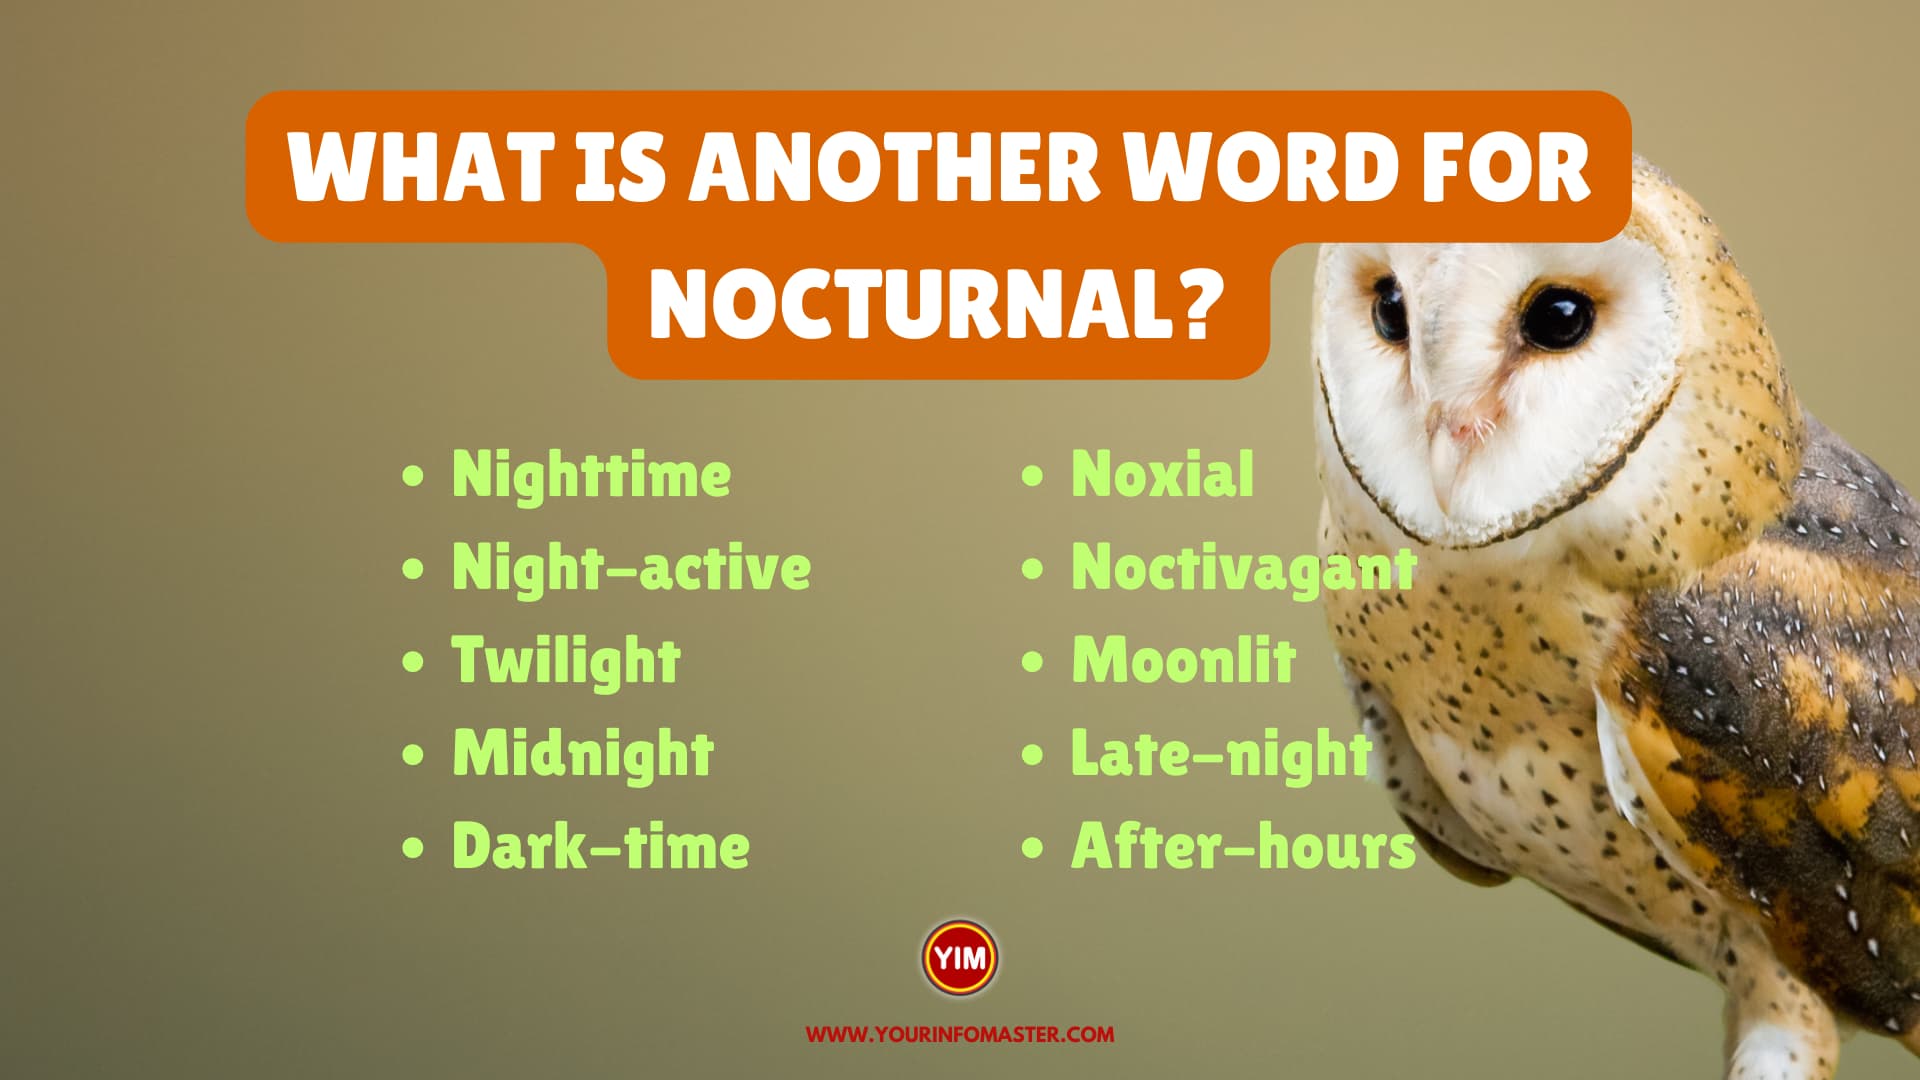 What is another word for Nocturnal